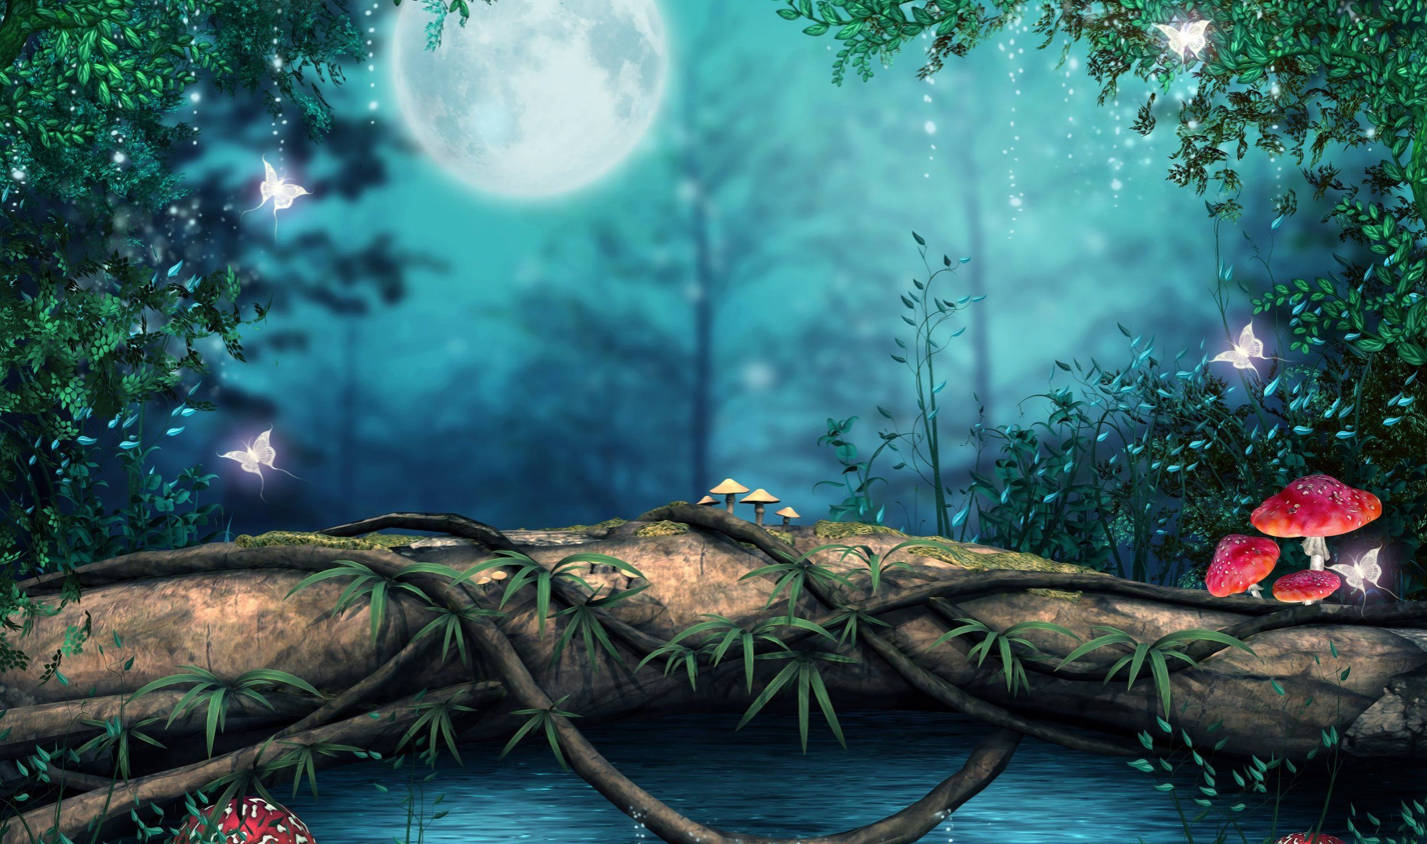 Free 3d Nature Wallpaper Downloads, [100+] 3d Nature Wallpapers for FREE |  